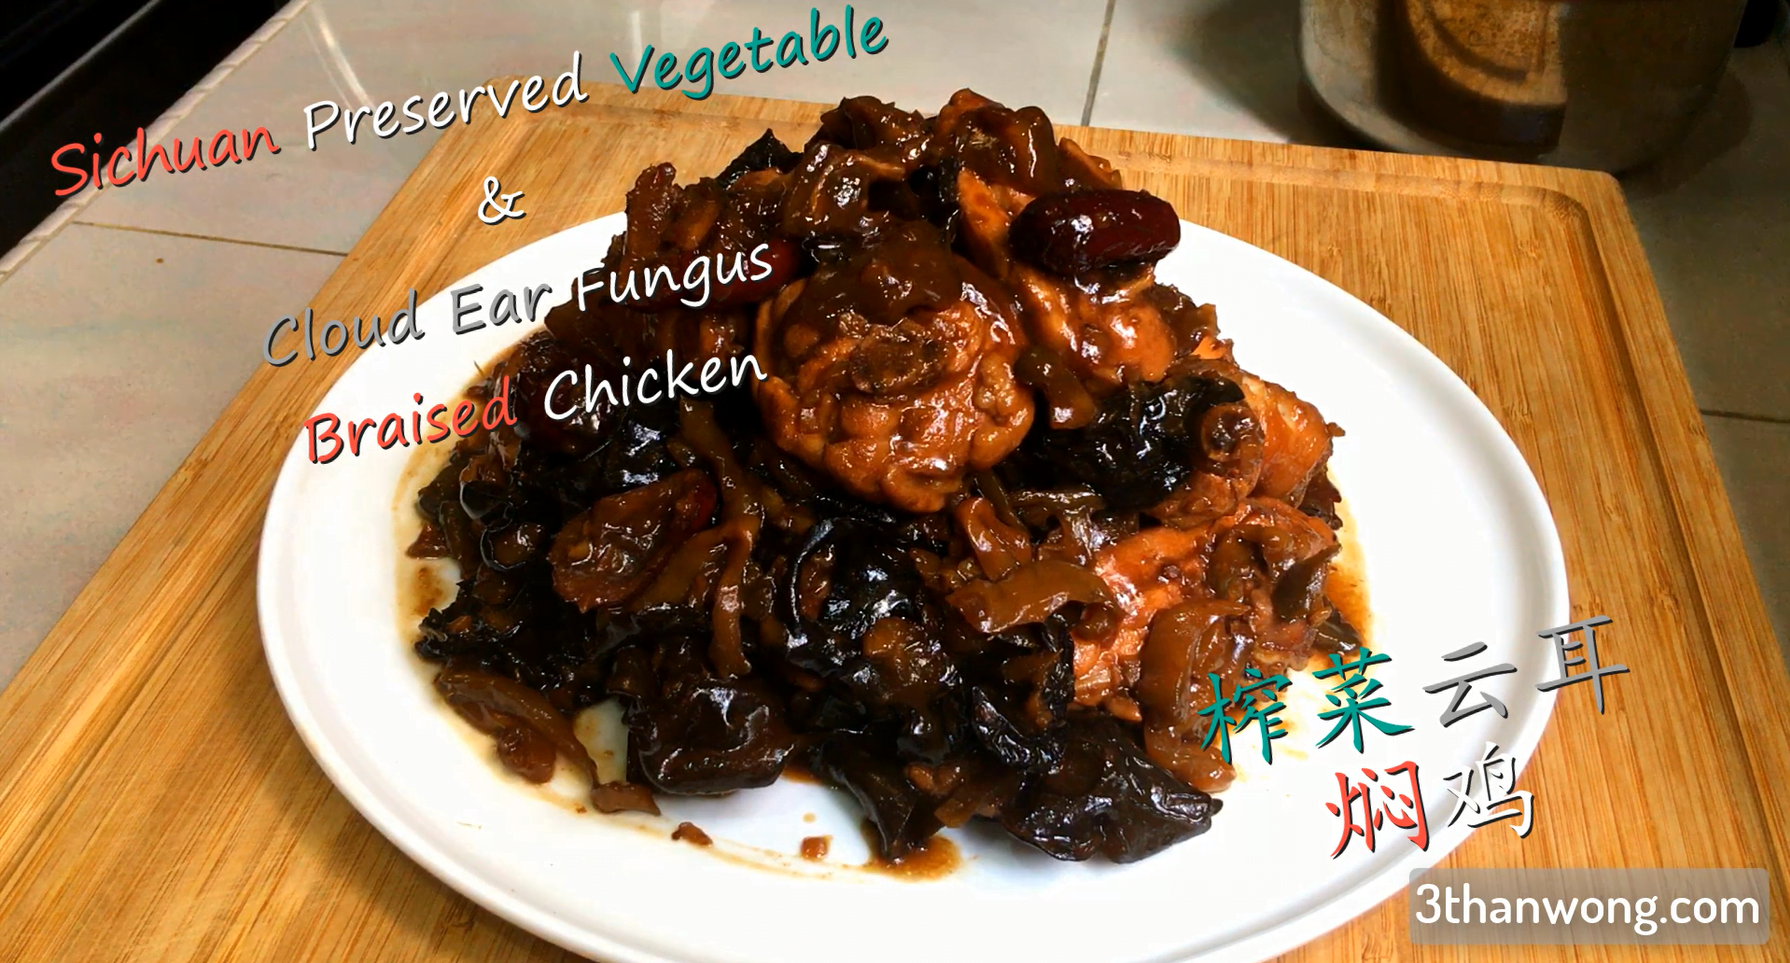 Chinese Chicken Recipe with Fungus and Vegetables